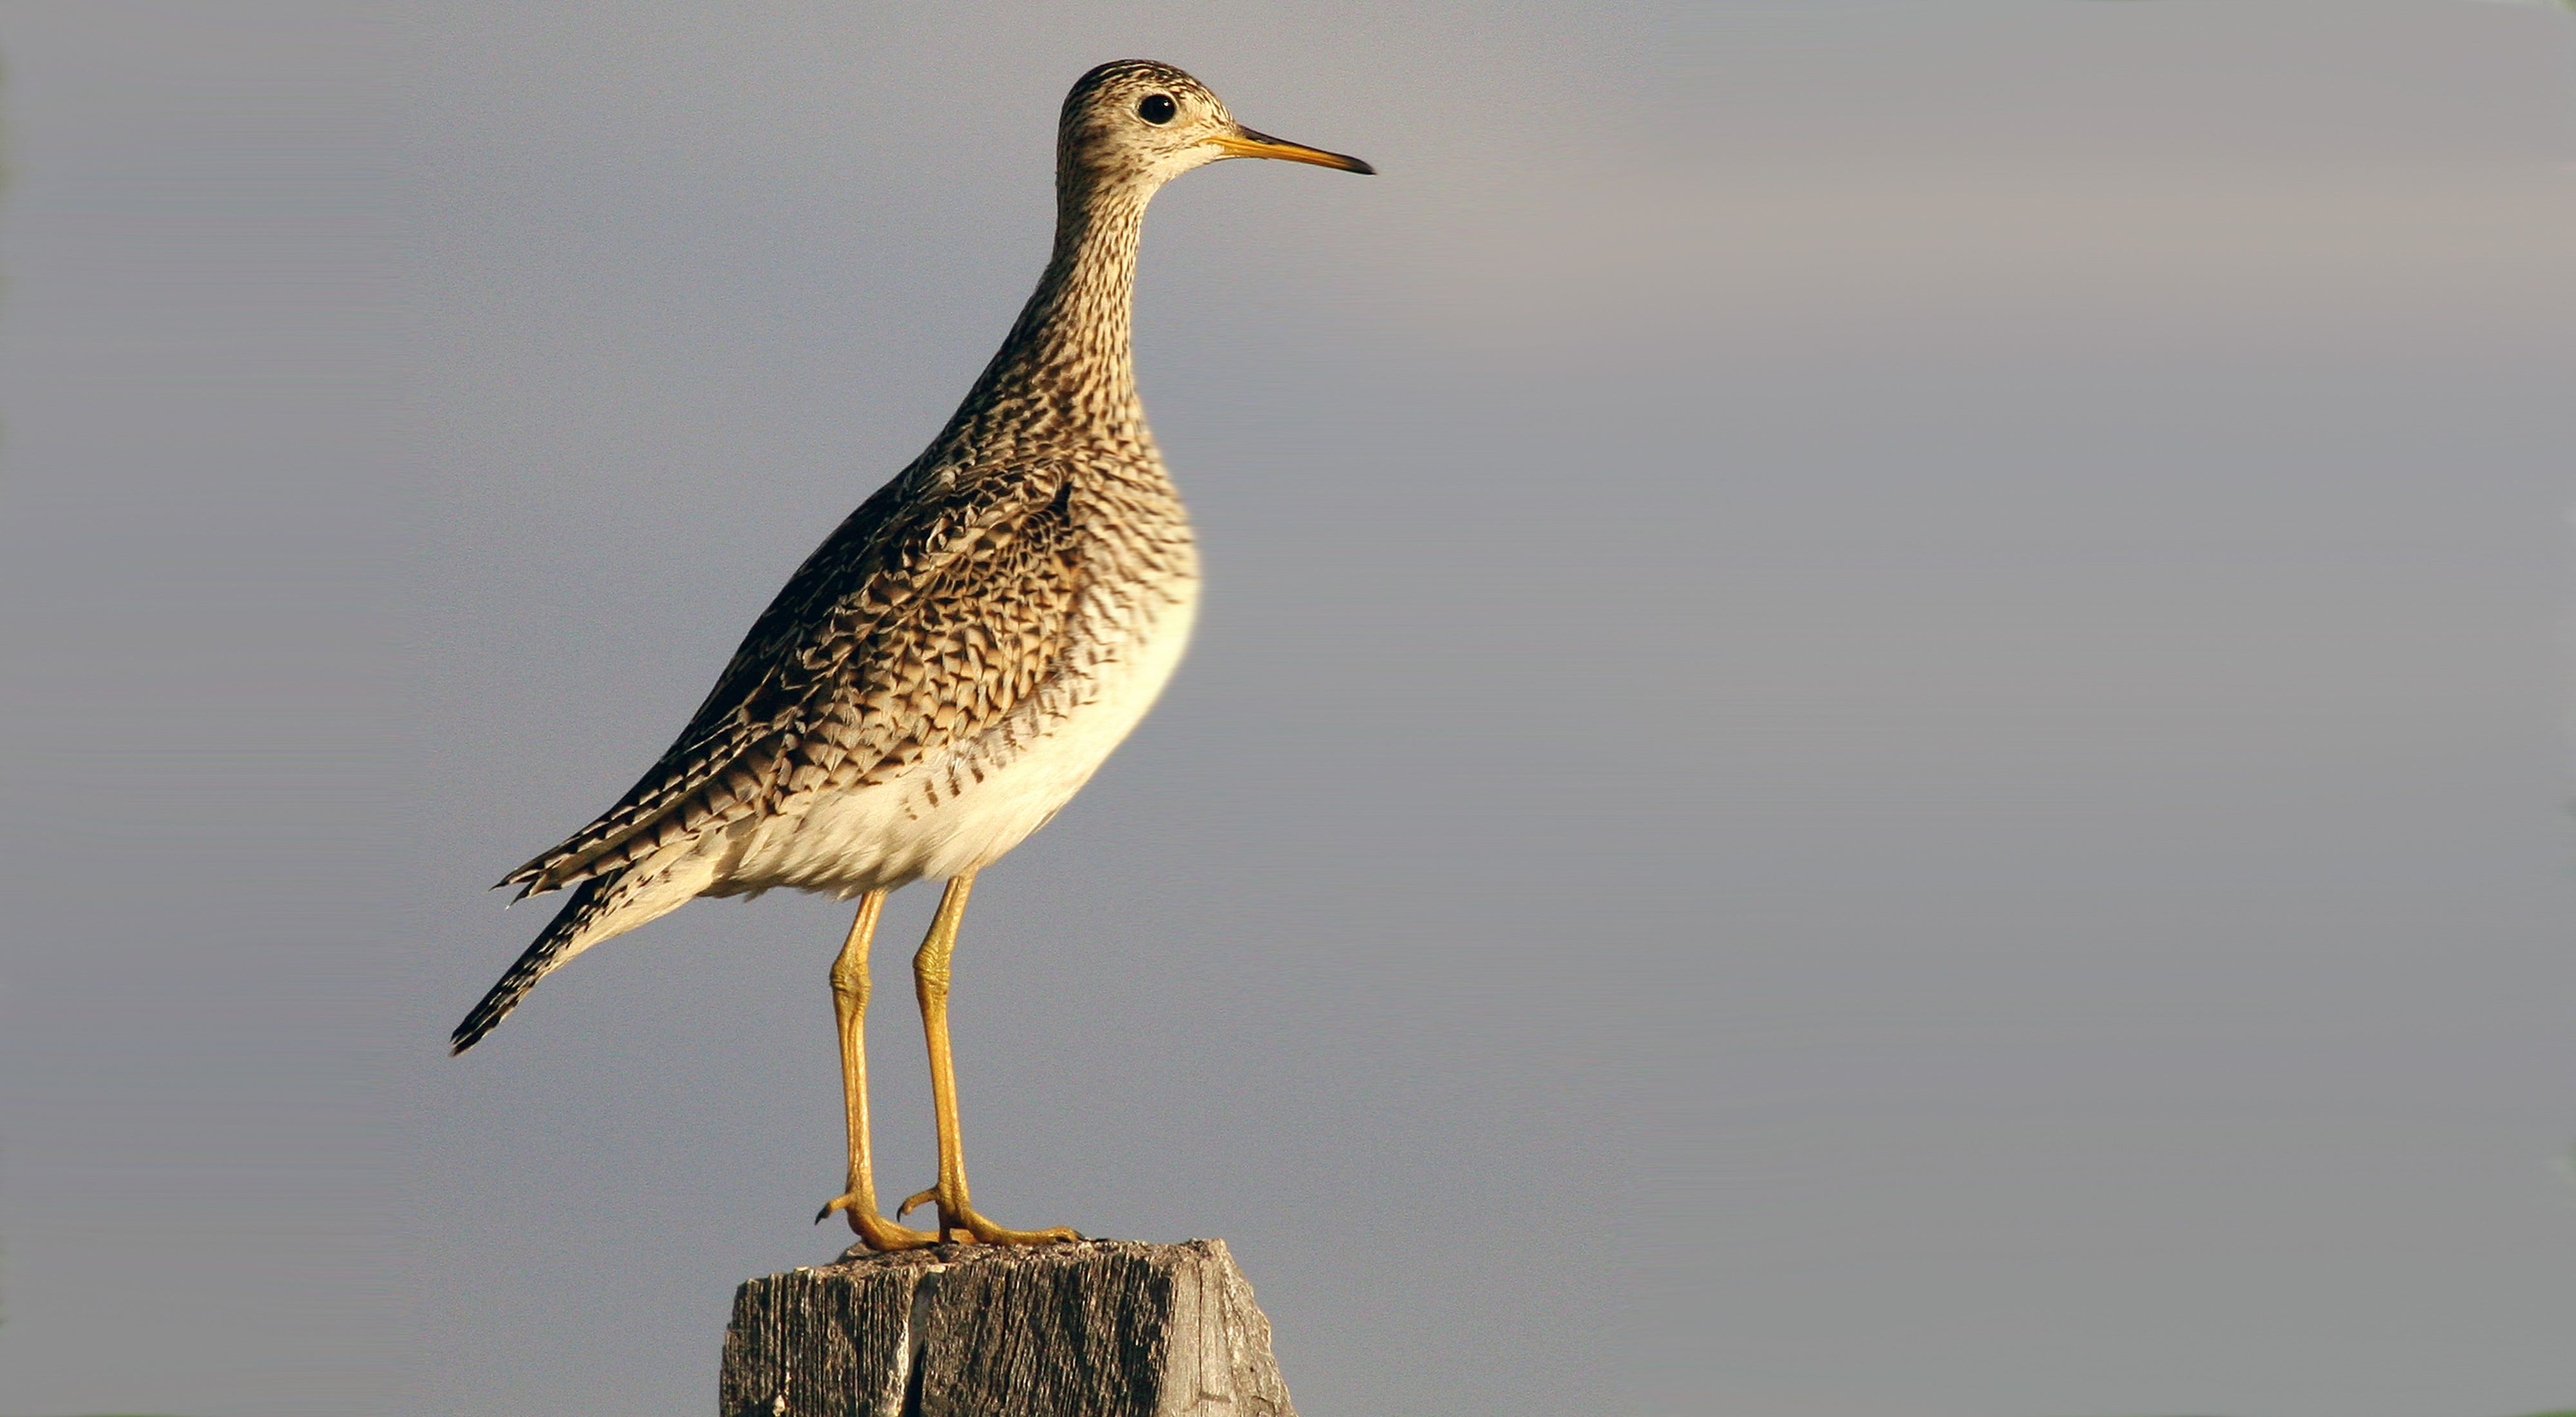 A profile view of an Upland Sandpiper bird. 